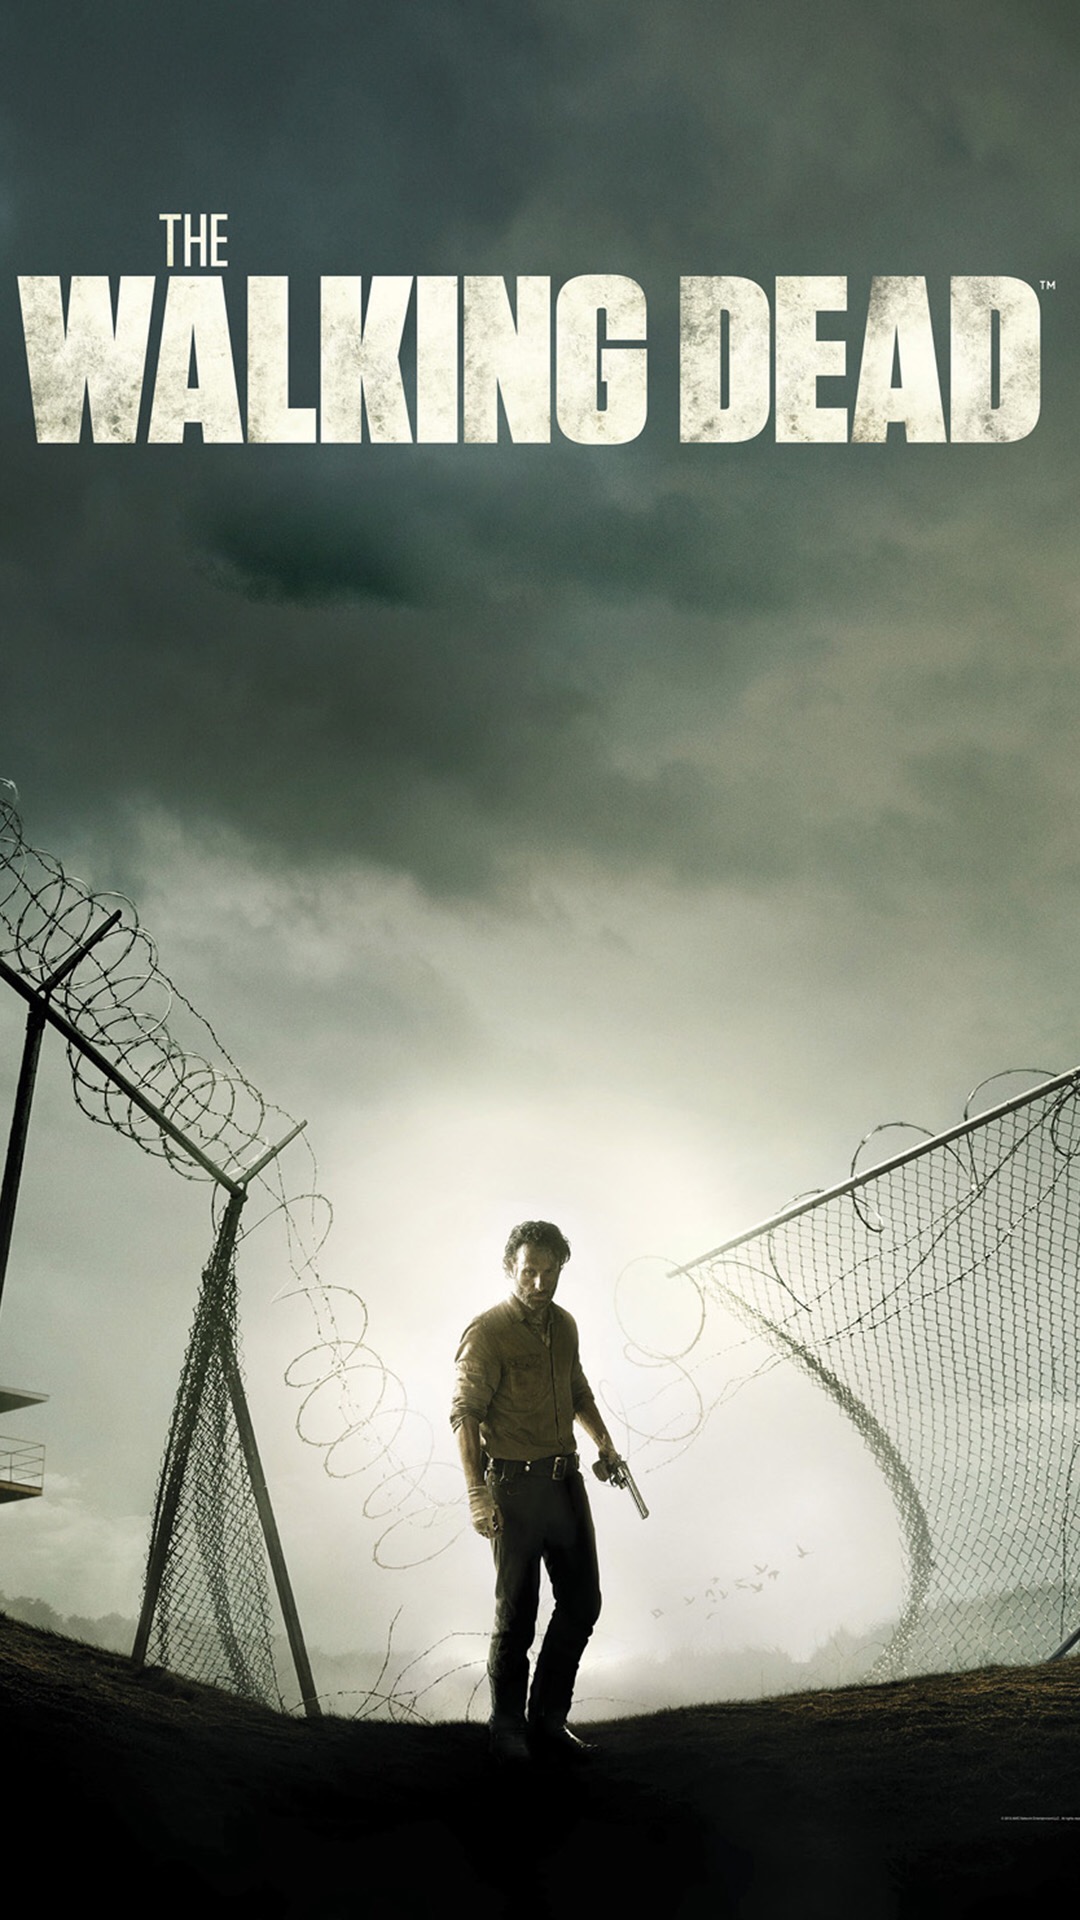 the walking dead wallpaper,album cover,font,photography,poster,movie